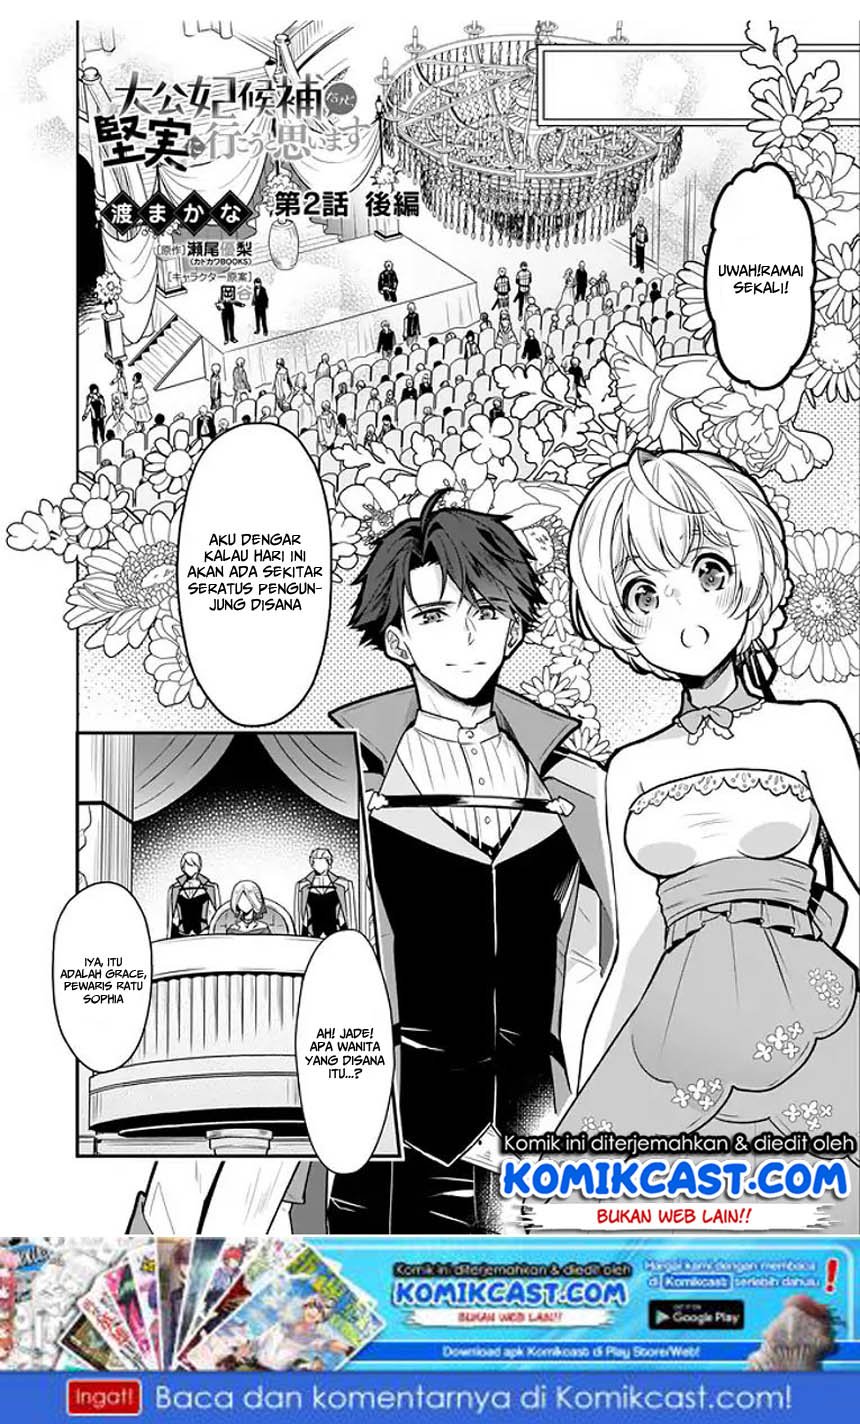 Baca I’m the Prince’s Consort Candidate However, I Believe I Can Certainly Surpass It! Chapter 2.2  - GudangKomik